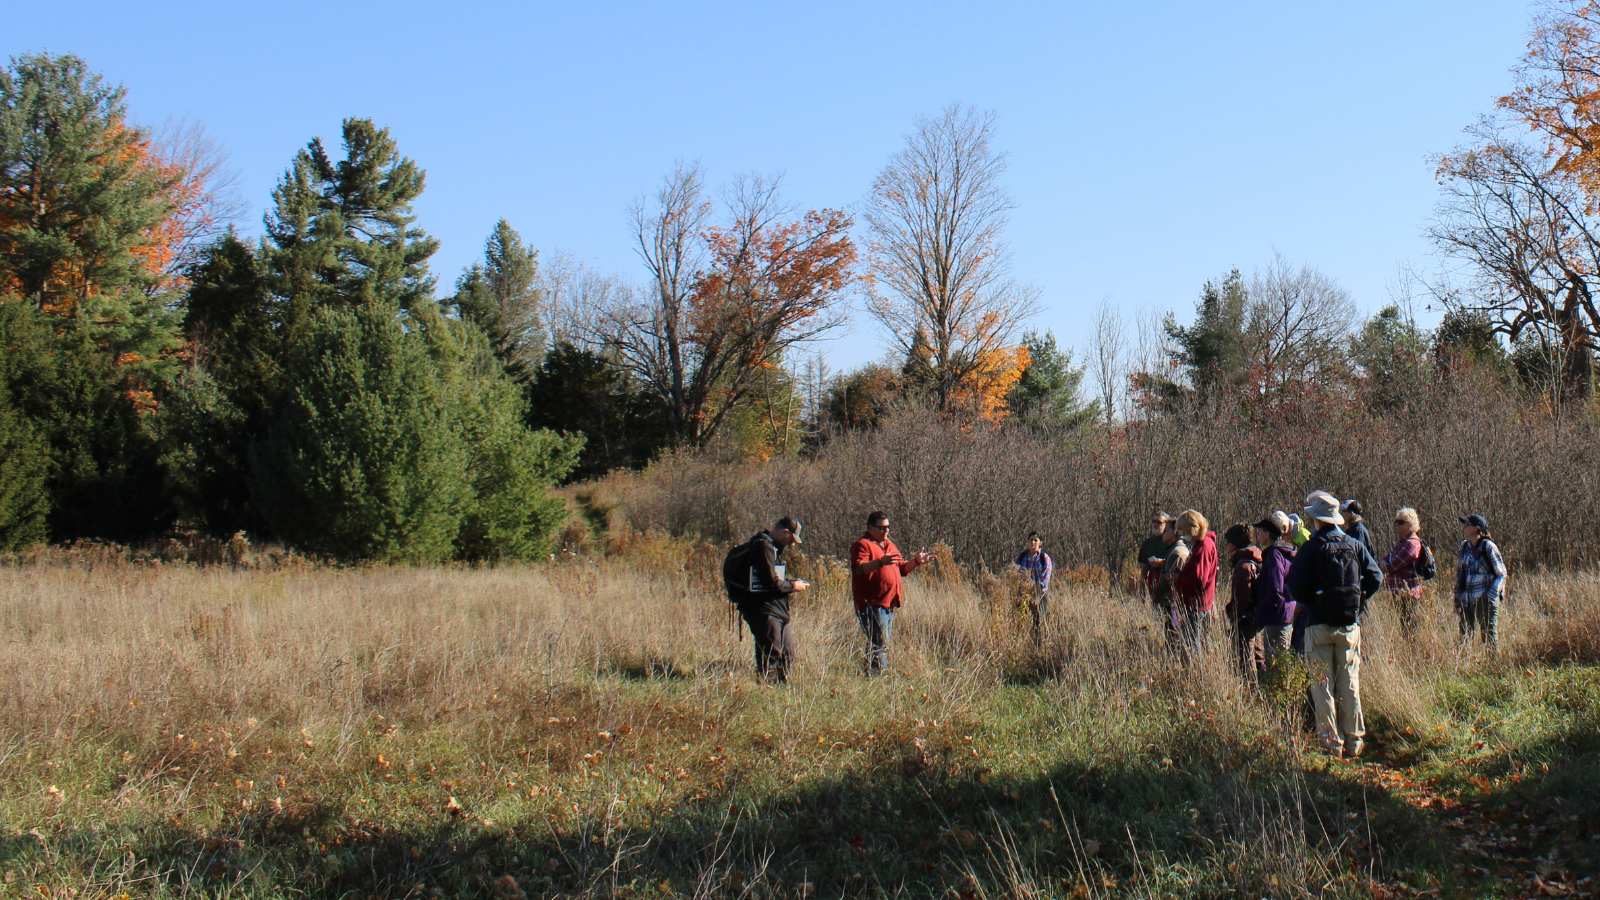 Gary Pritchard of 4 Directions Conservation Consulting Services leading an Indigenous Bioblitz at Dance Nature Sanctuary